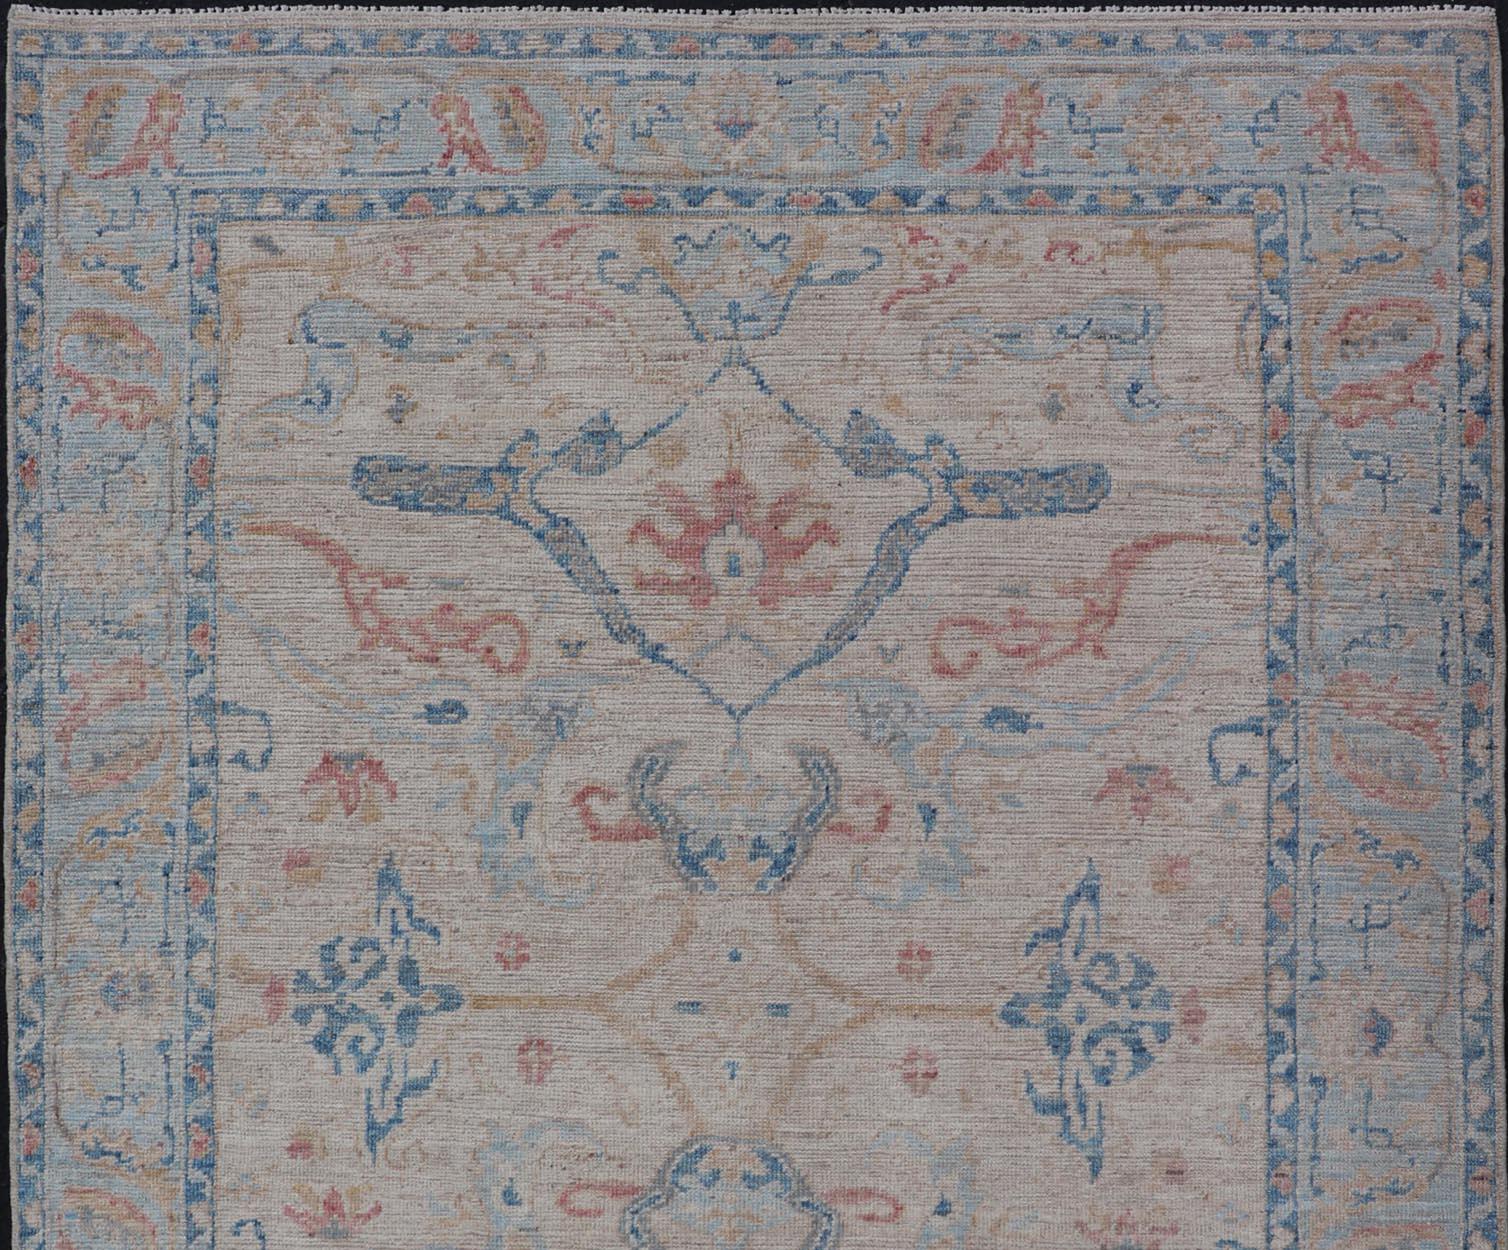 Hand knotted Oushak made in wool with a field is backed by a ivory color, with a light blue border, etched with elegant golden/brown branches. The arabesque-like design brings splashes of light blue, cognac, and reddish brown color. 

Measures: